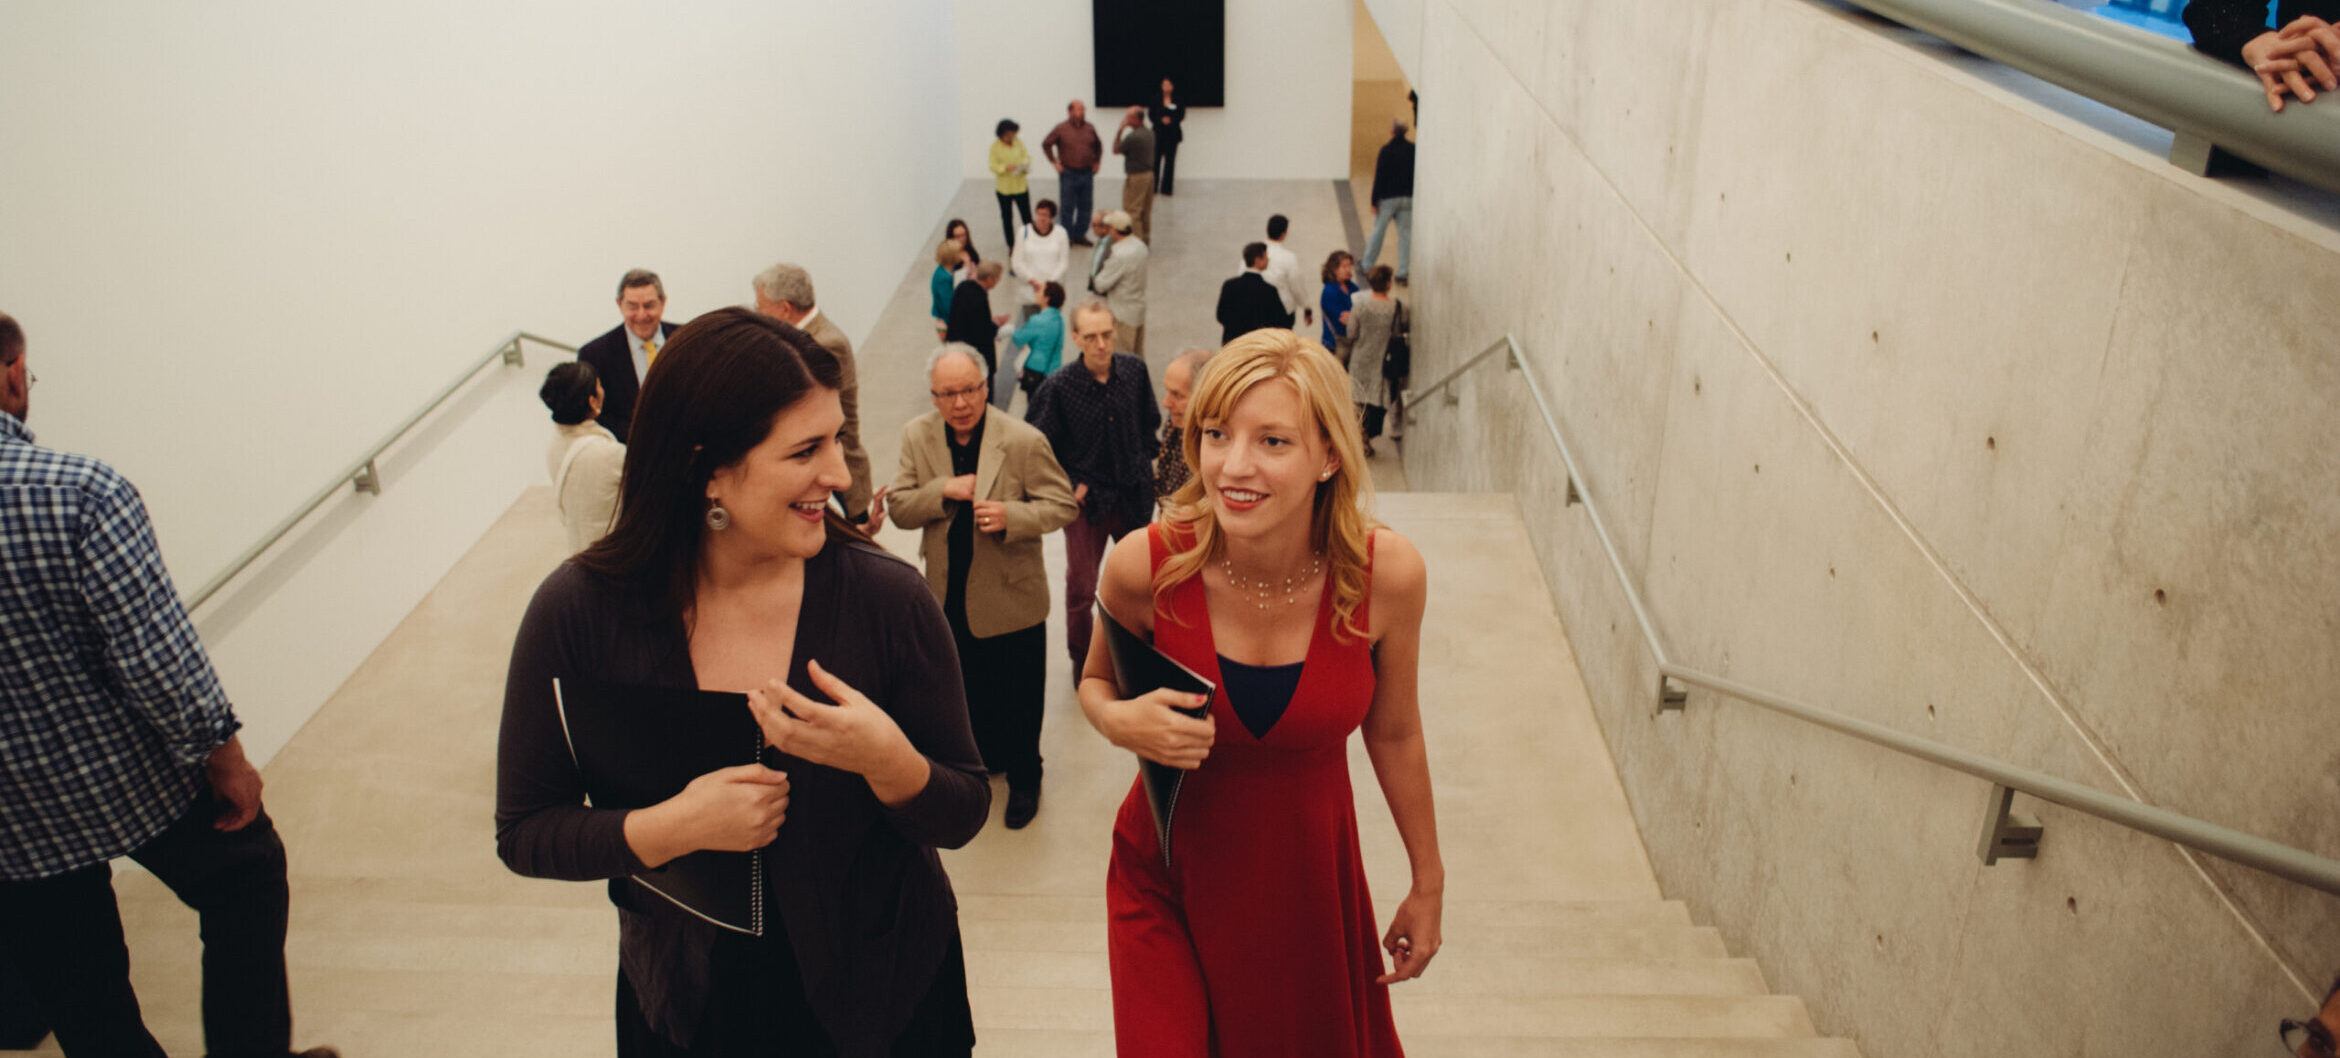 A visitor in with brown hair in a black dress and one with blonde hair in a red dress walking up the stairs at a Pulitzer opening.